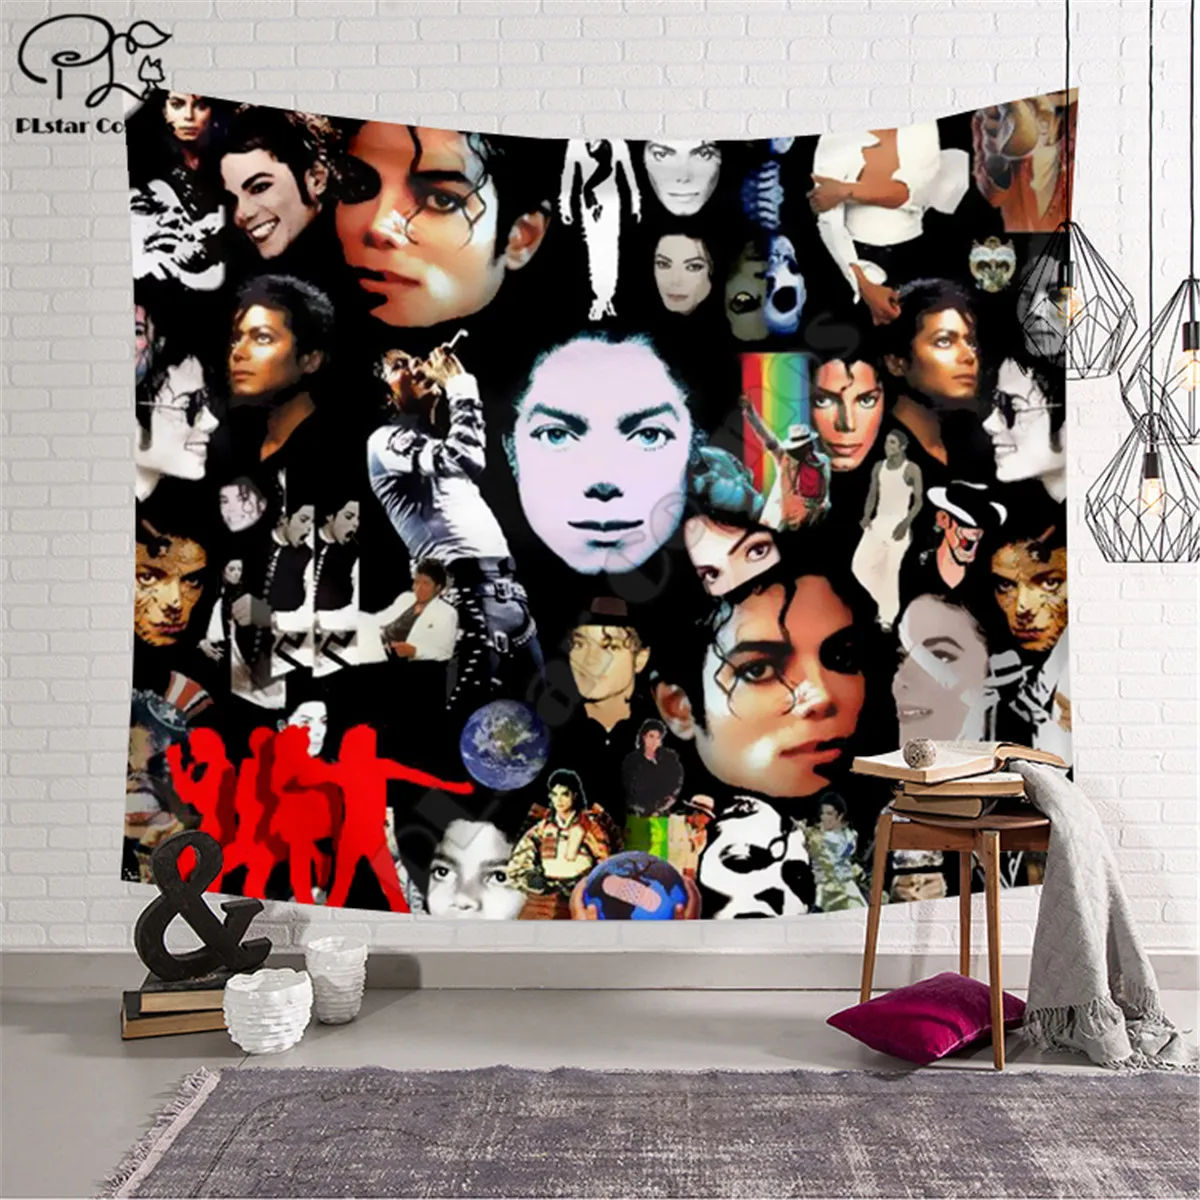 Michael Jackson pattern Funny cartoon Blanket Tapestry 3D Printed Tapestrying Rectangular Home Decor Wall Hanging style-3 Home Decor cb5feb1b7314637725a2e7: 1|2|3|4